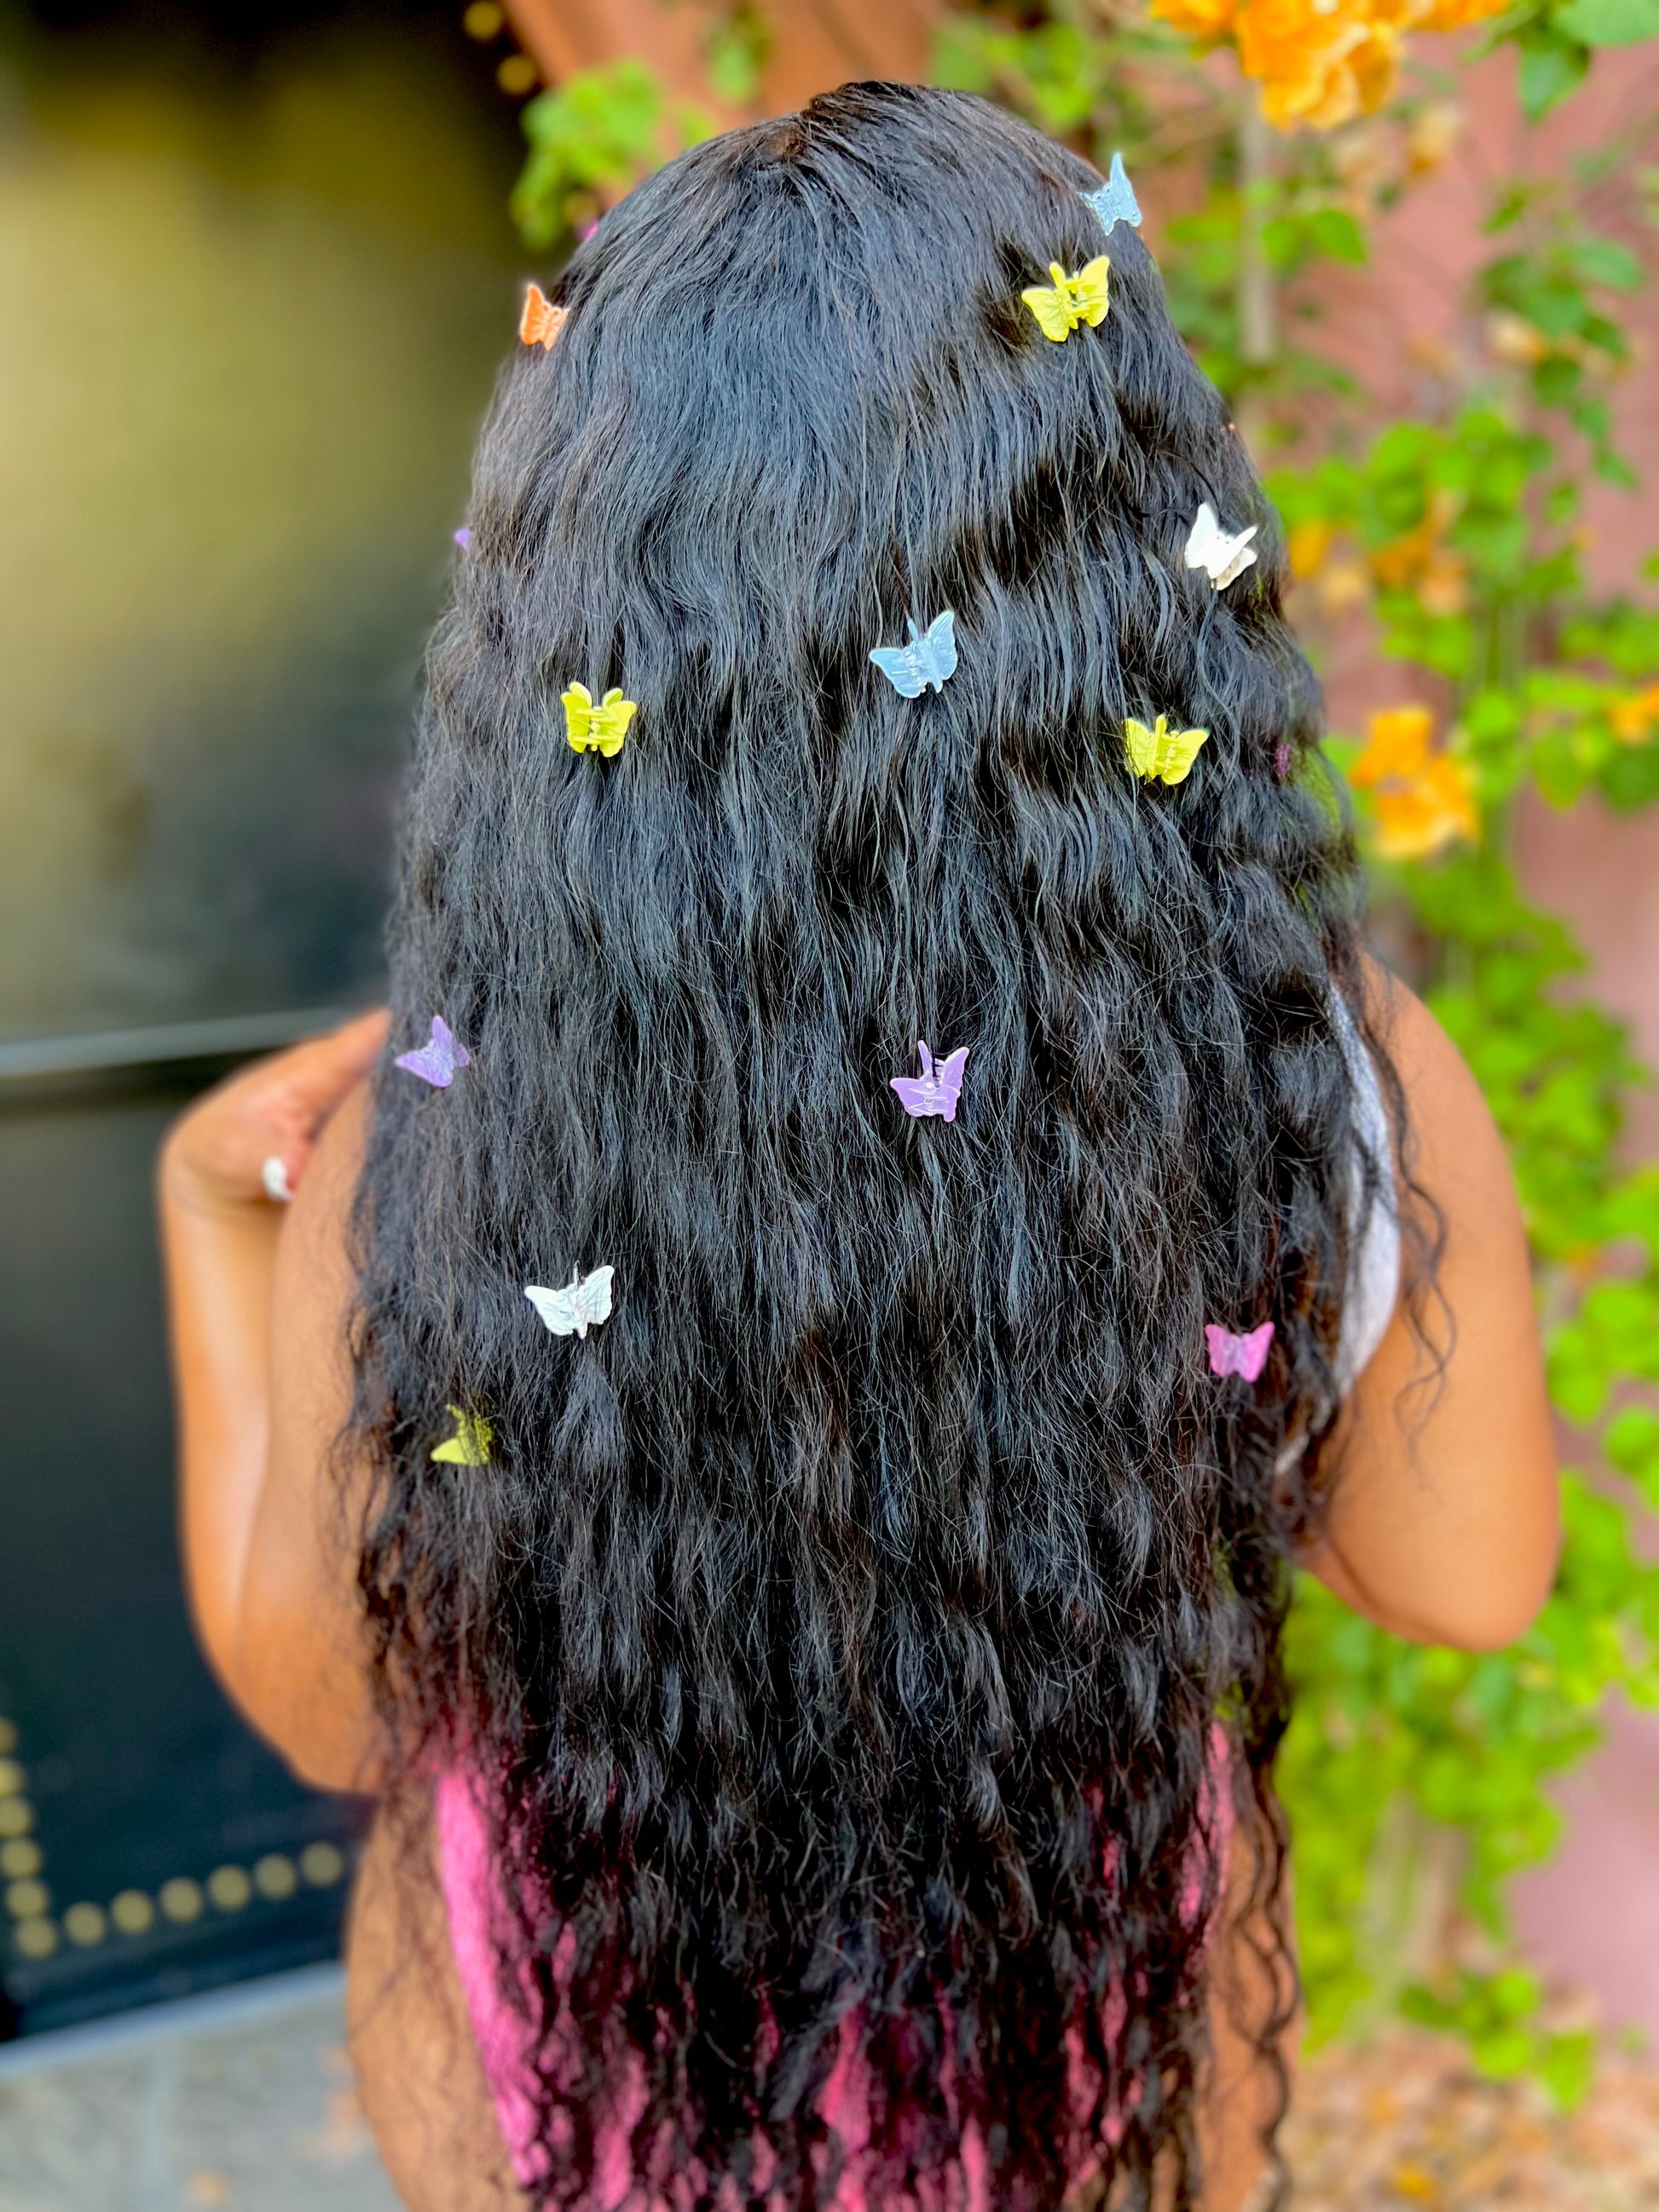 Mini Butterfly Clips – Curlish